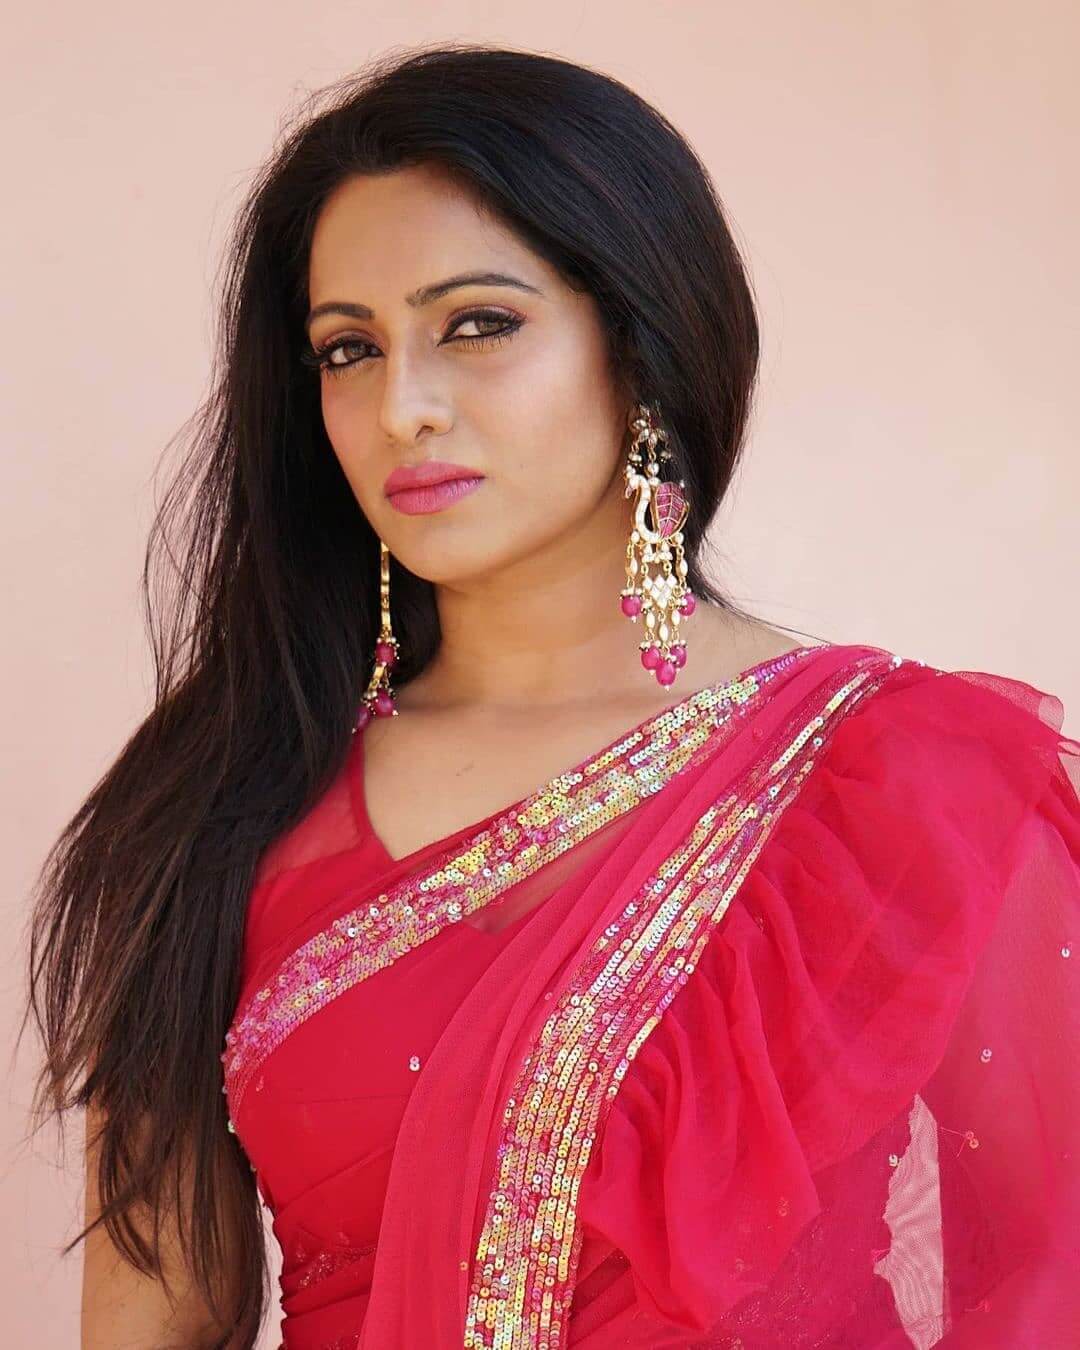 Udaya bhanu attended an event wearing a pink net saree that has ruffles at ...